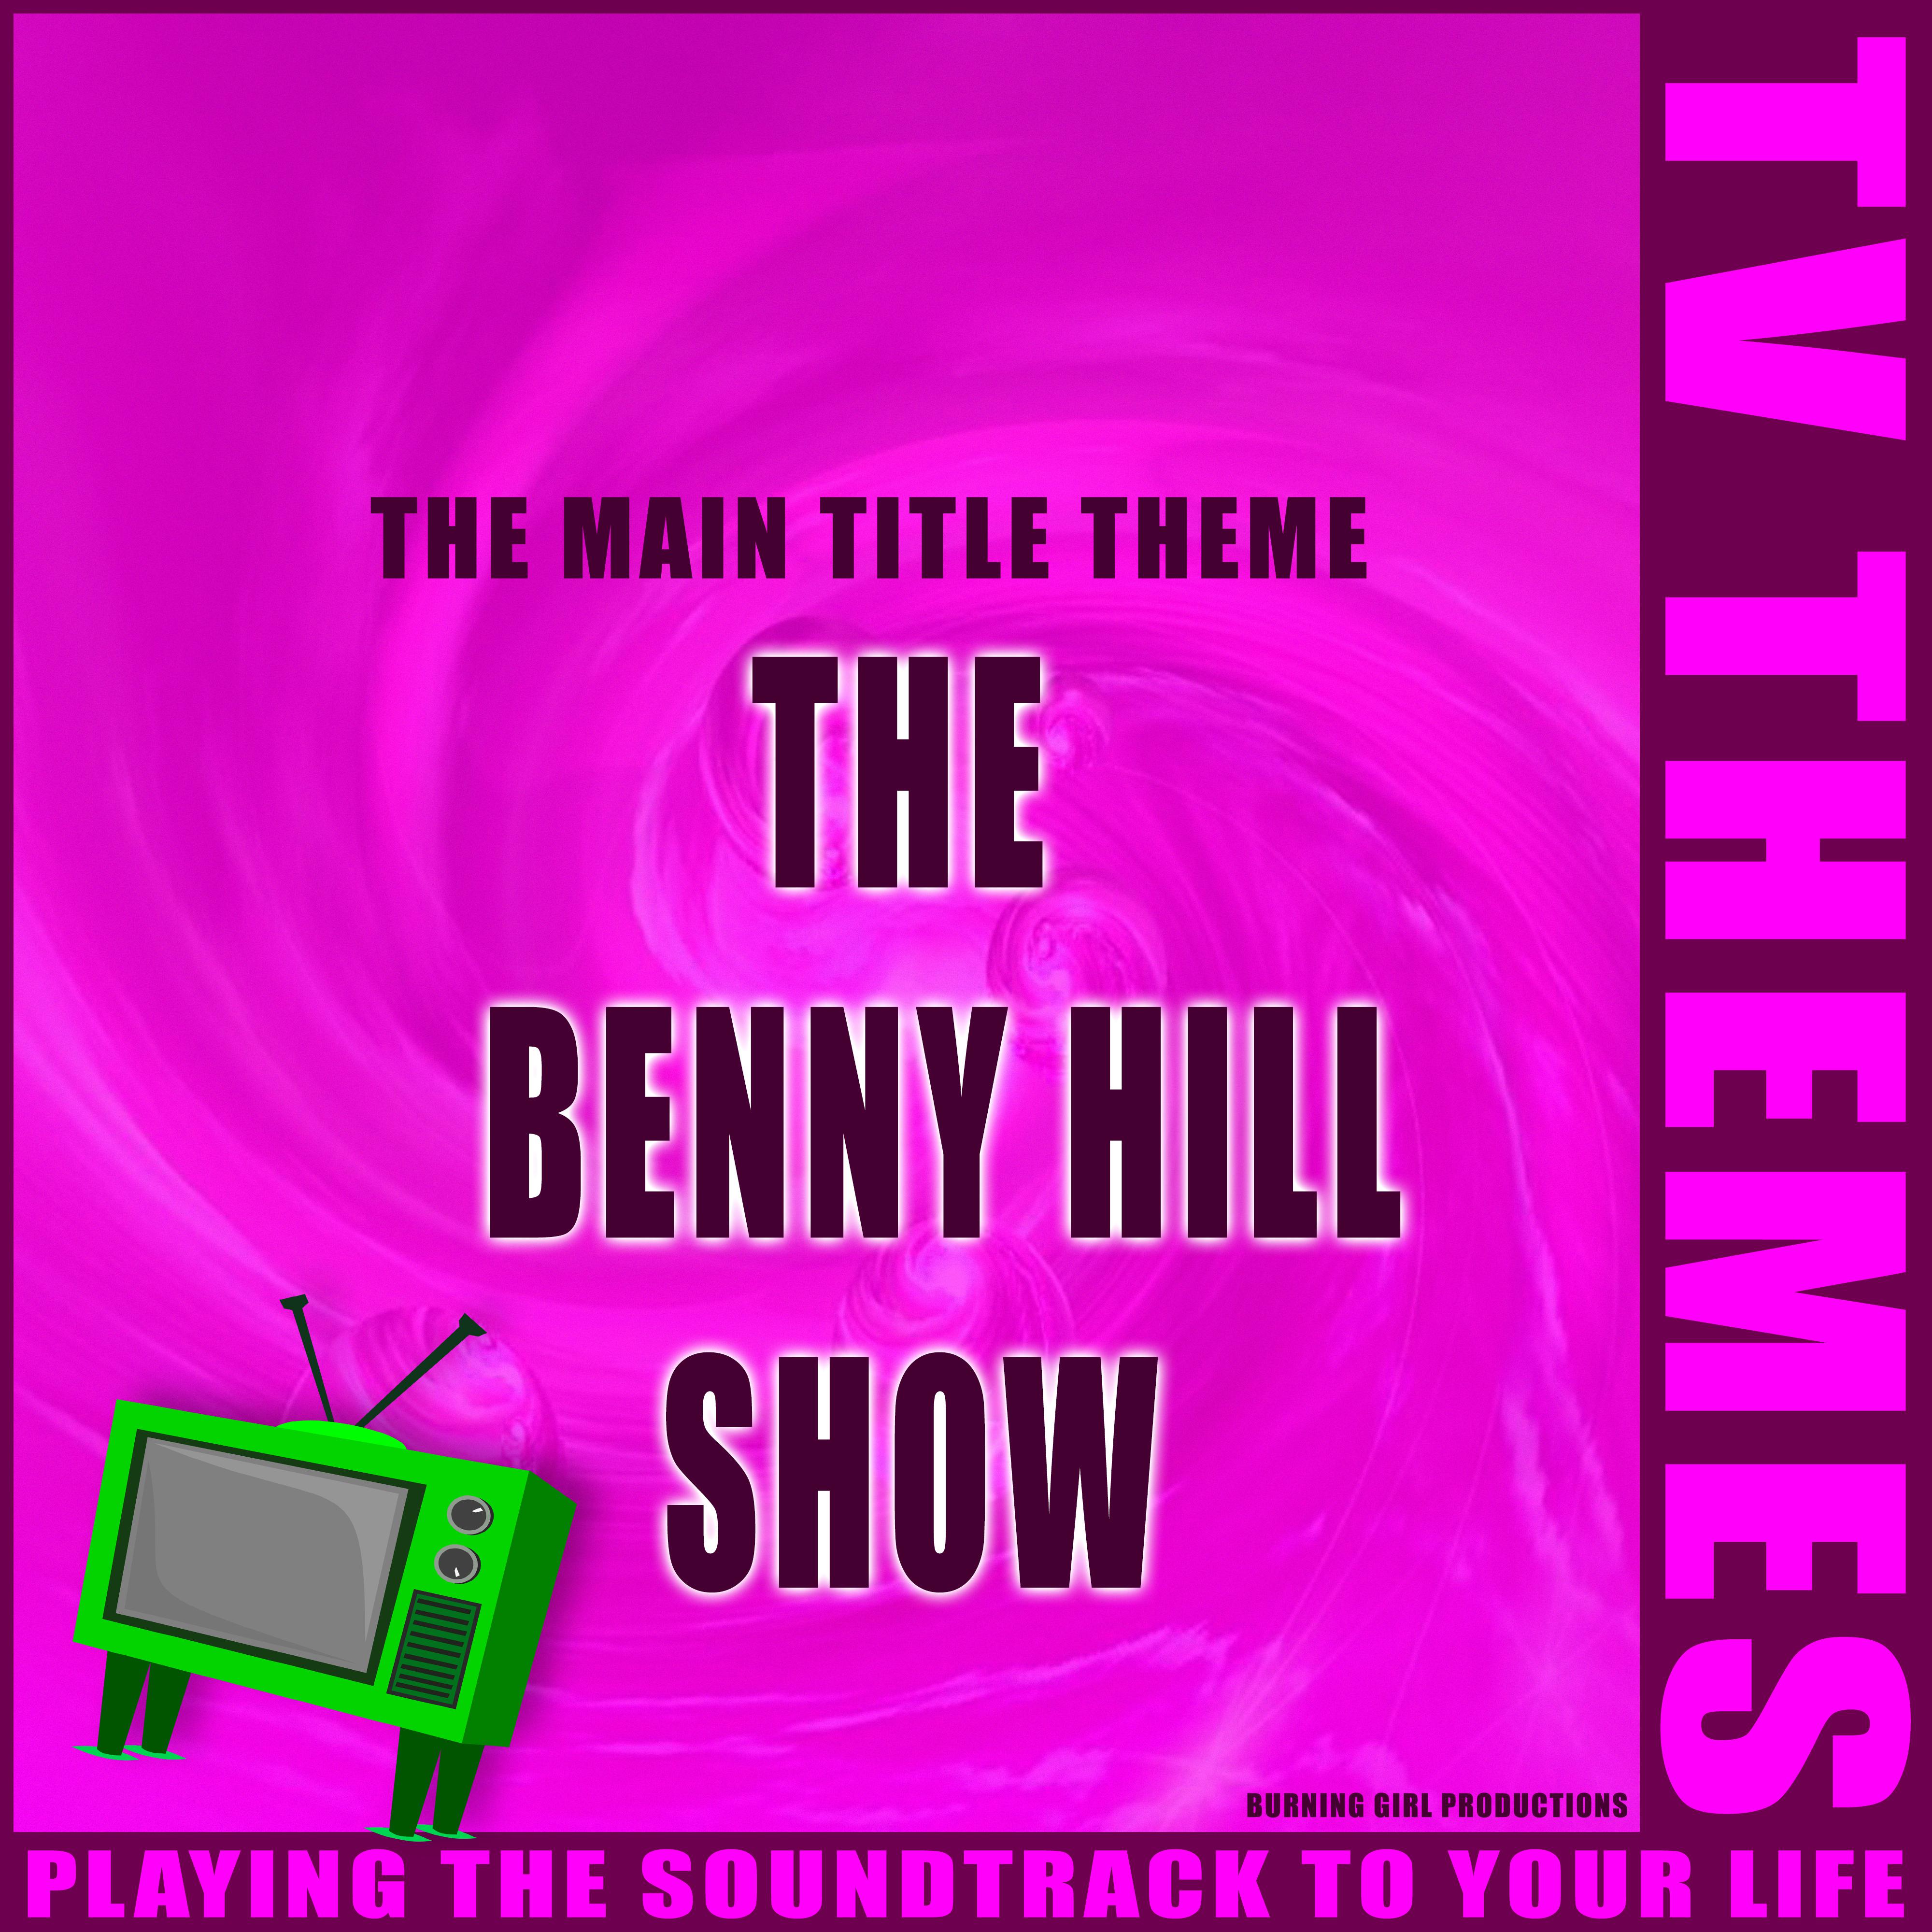 The Main Title Theme - The Benny Hill Show